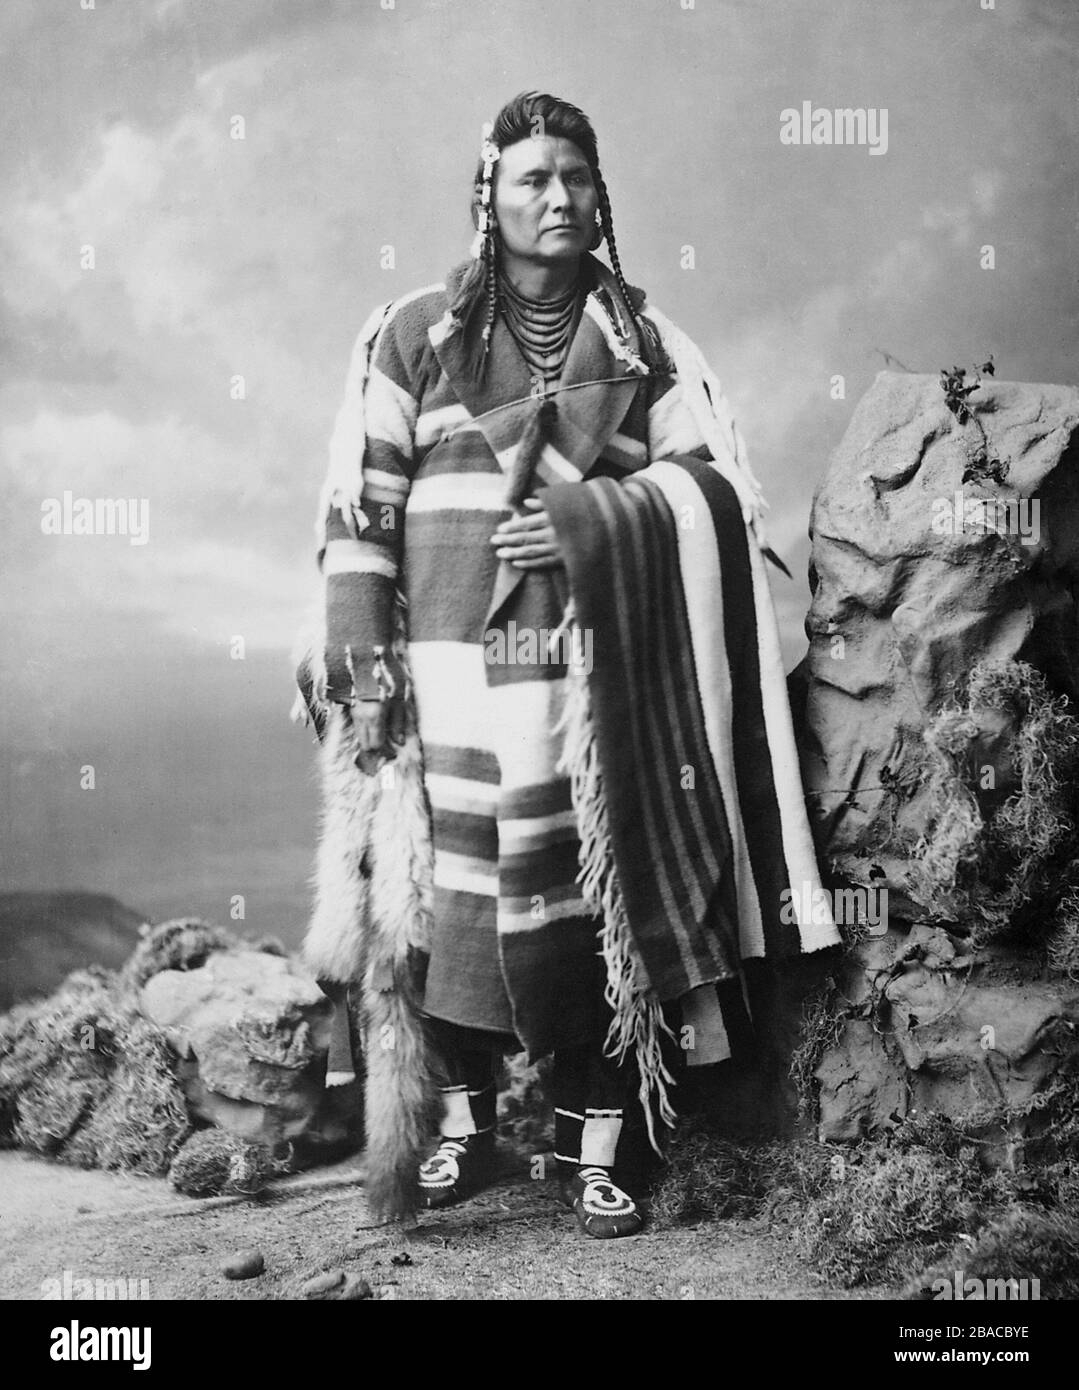 Photo 1900 Pacific Northwest "Native American Indian Chief" 